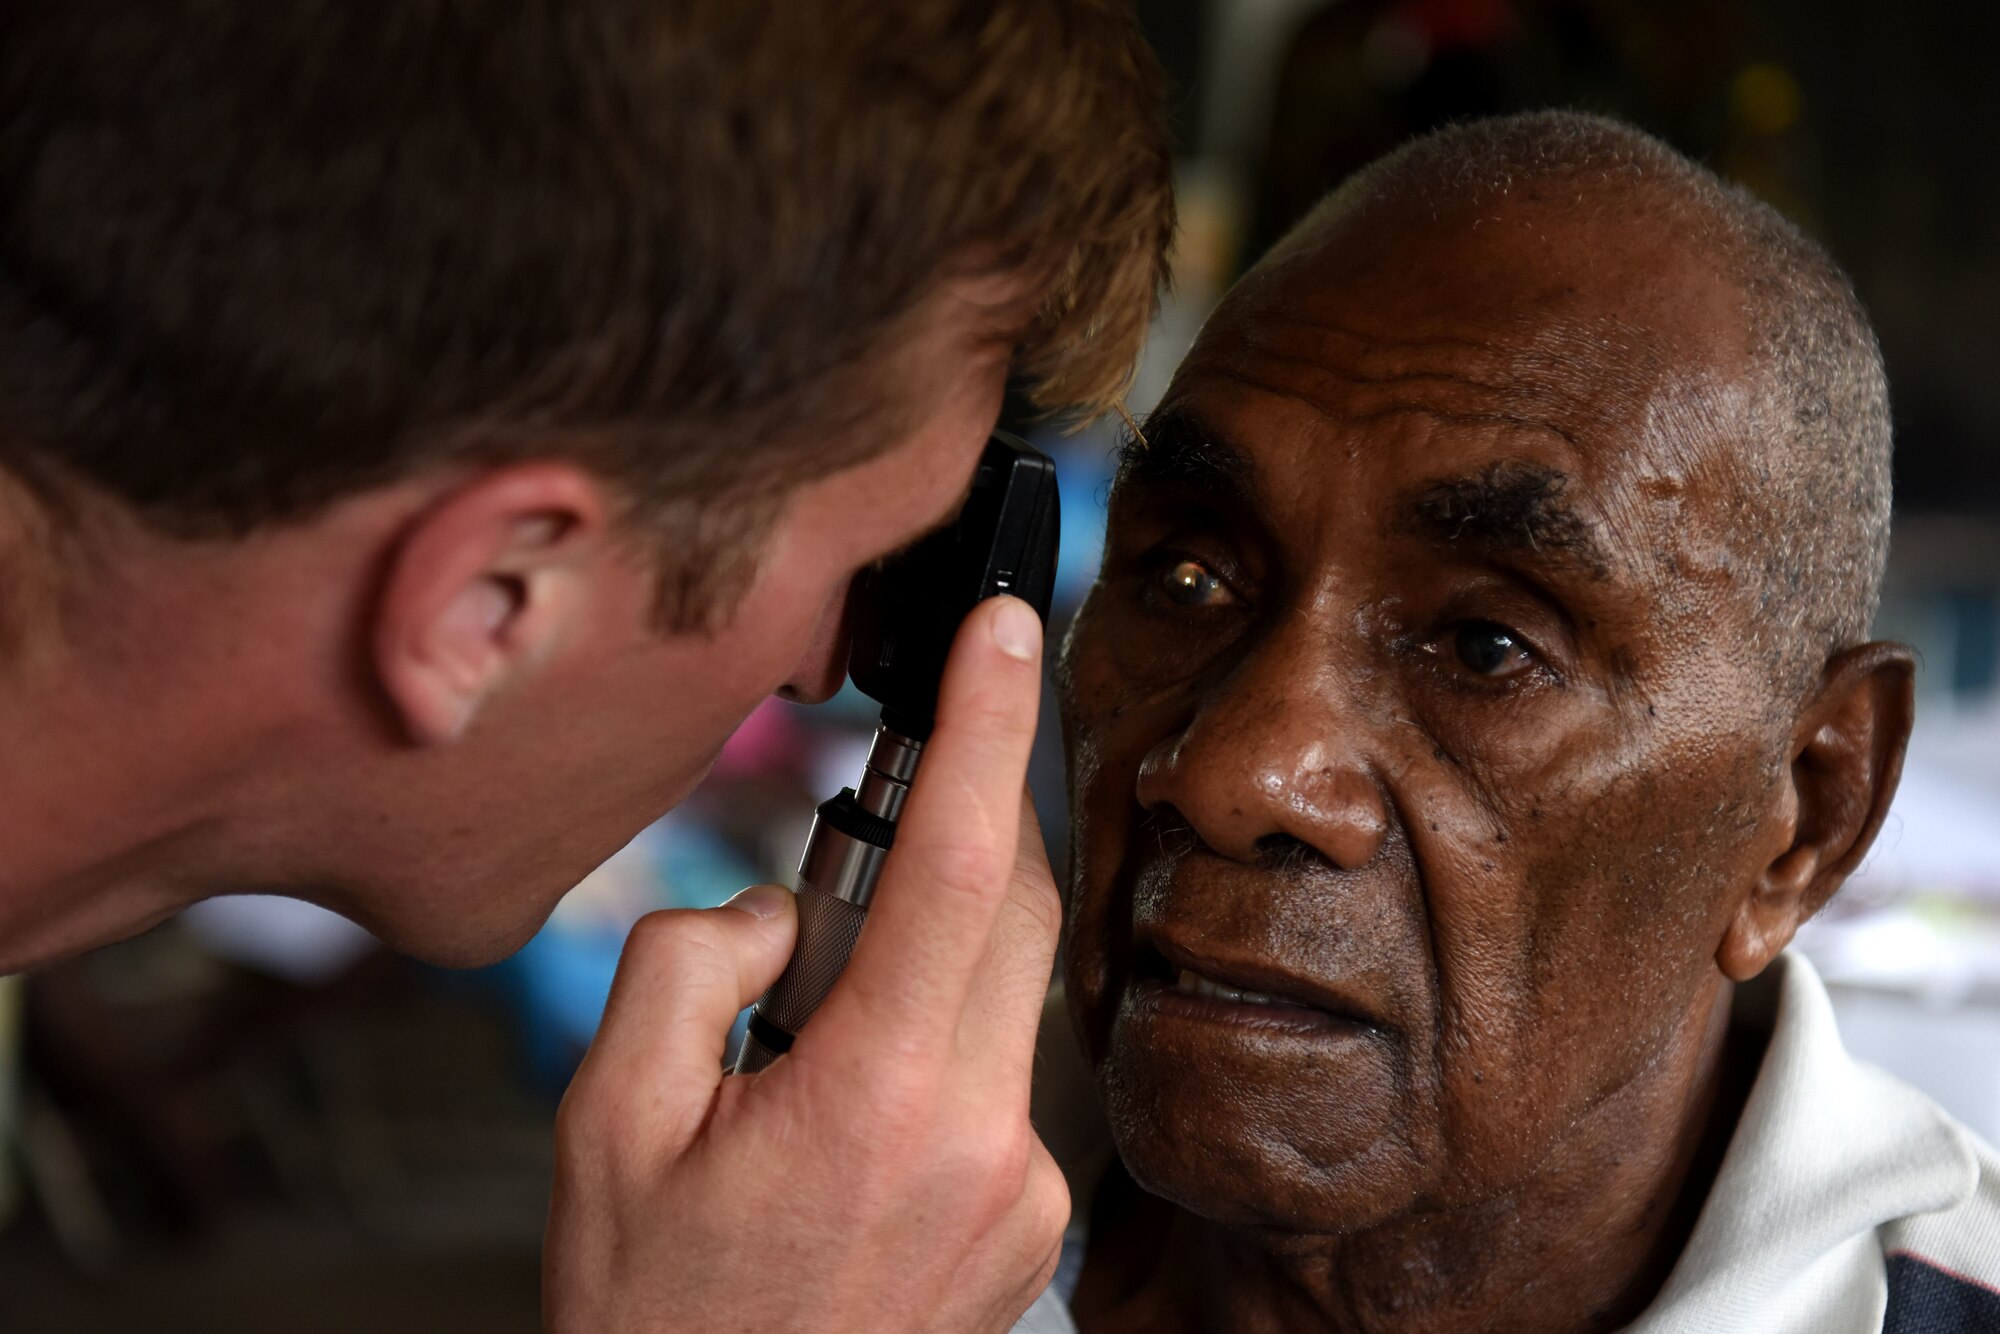 U.S. Air Force Capt. Eric Noll, an optometrist with the 354th Medical Group, Eielson Air Force Base, Alaska, checks a patient’s eyesight at Tata Primary and Secondary School during Pacific Angel 18-3 in Luganville, Espiritu Santo Island, Vanuatu, July 16, 2018.